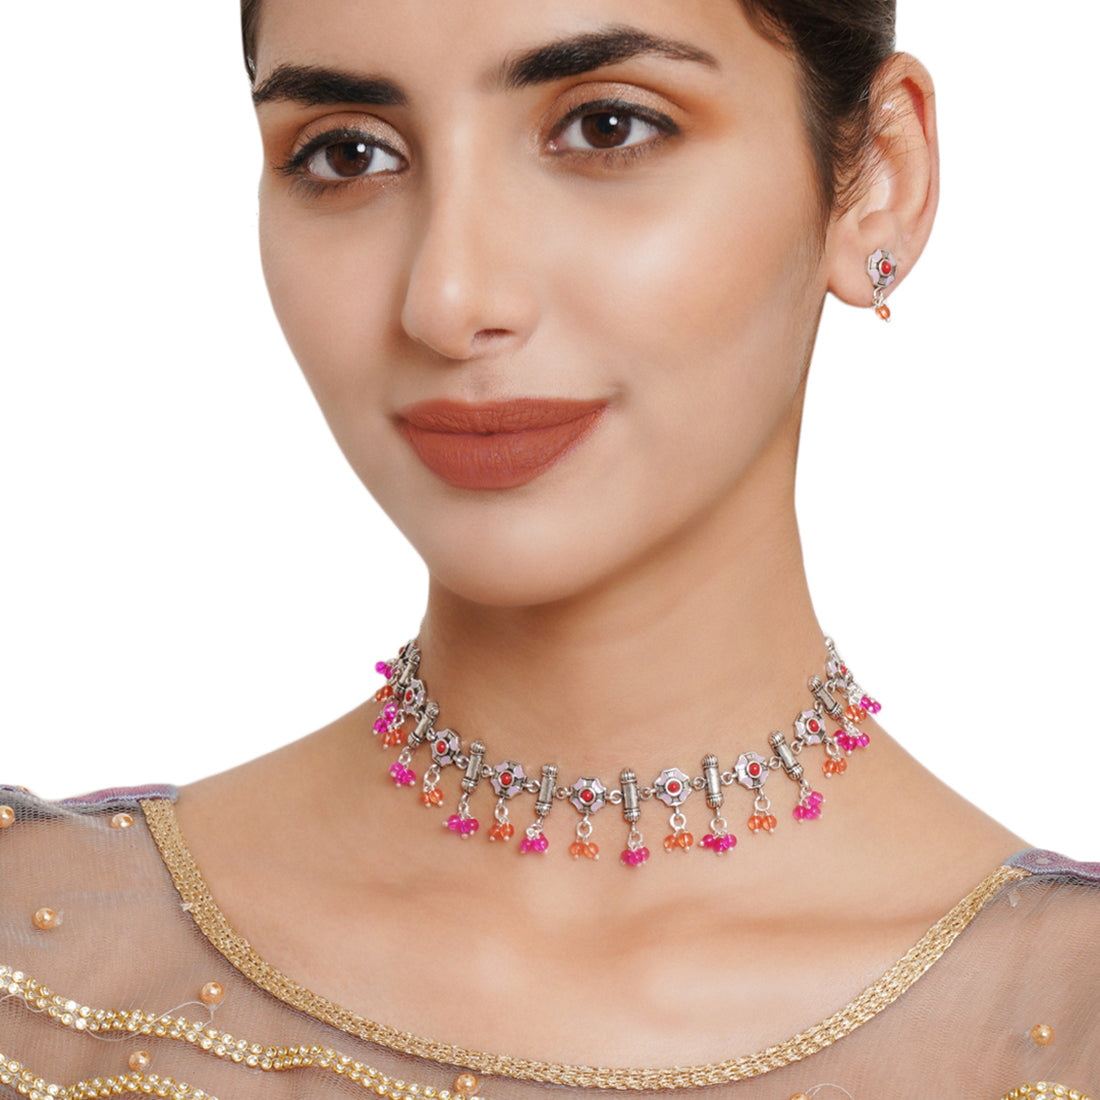 Festive Hues Intricate Enameled Choker Necklace Set with Artisanal Motifs and Pink Beads